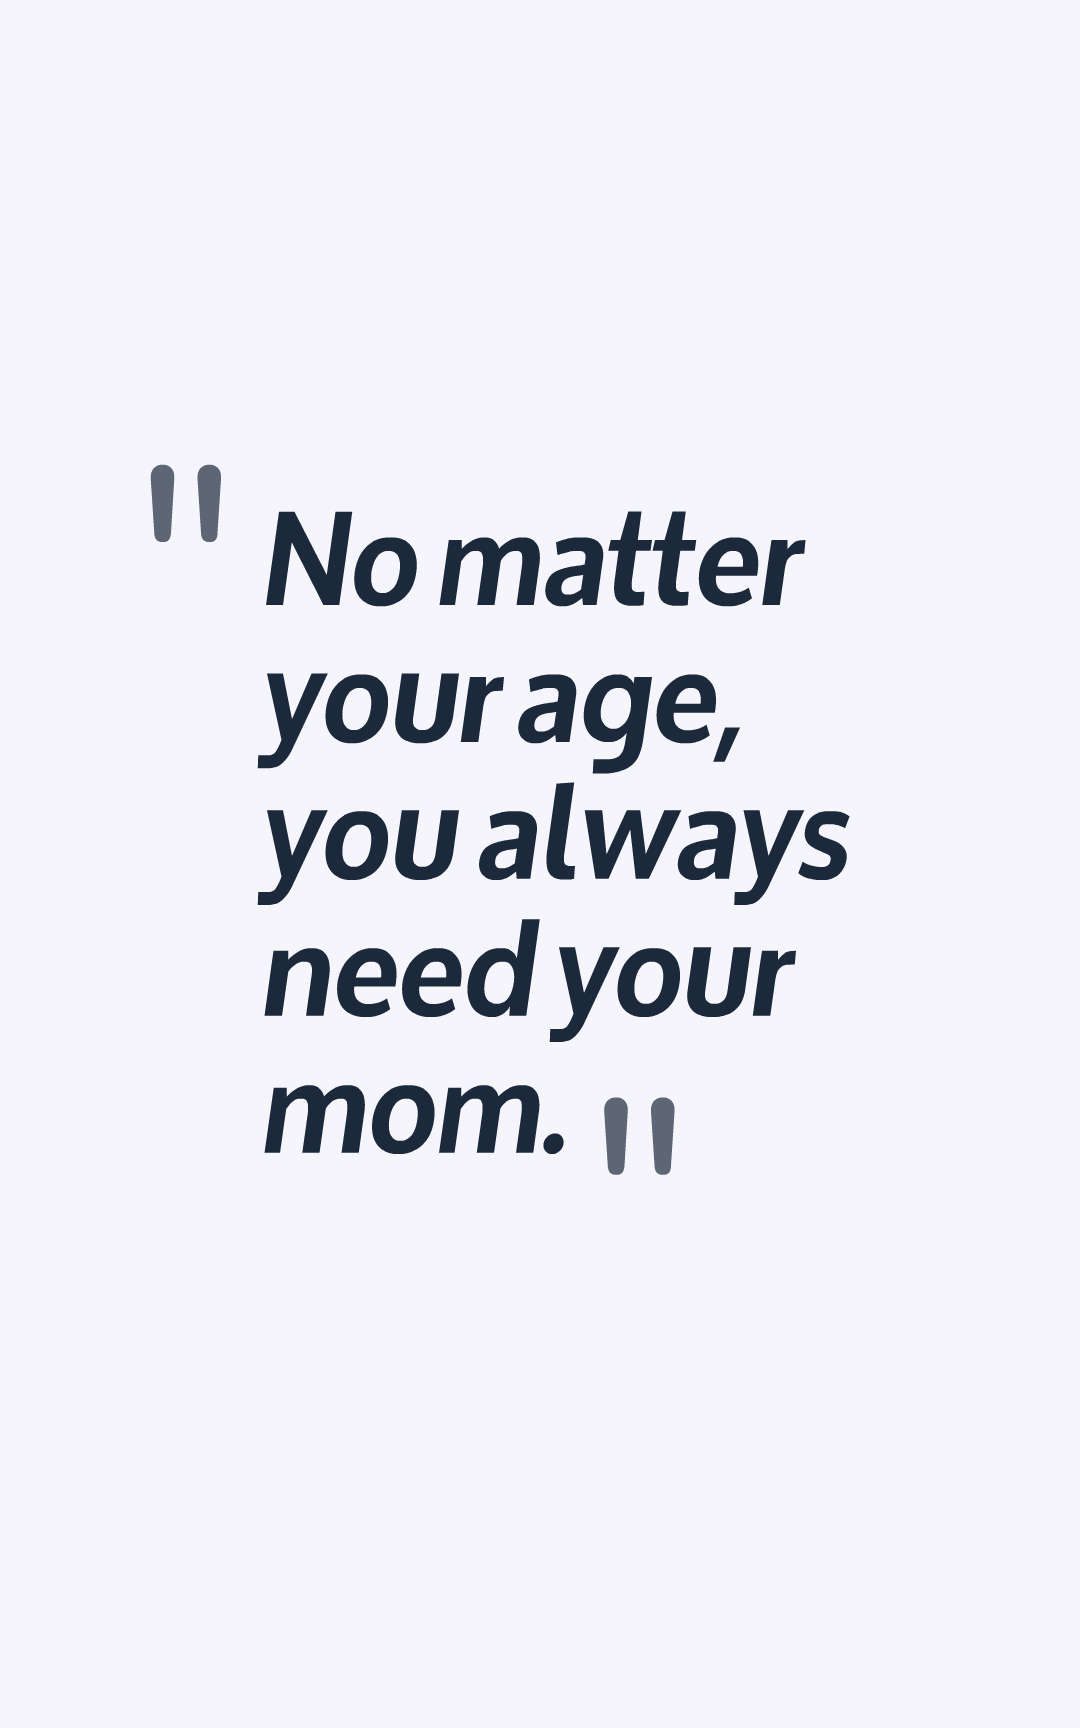 No matter your age, you always need your mom.